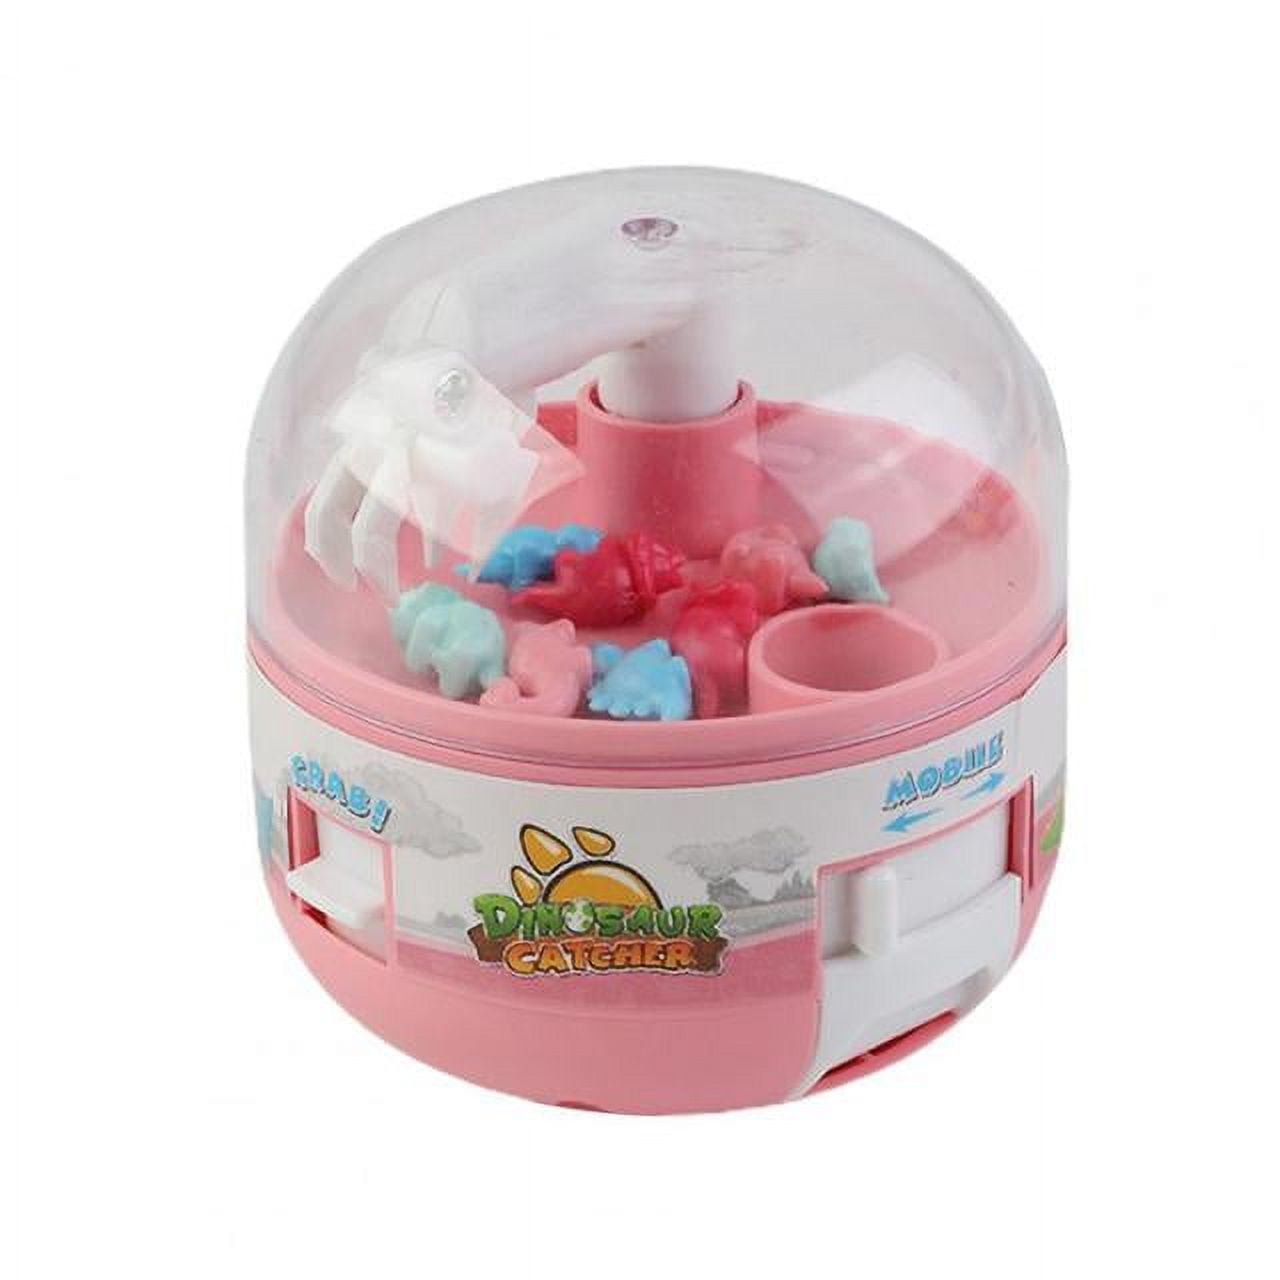 Uszeoka Mini Claw Machine for Kids,Toy Grabber,24 Tiny Stuff  prizes,Dinosaur prizes Game,Miniature Things,Suitable for Birthday Gifts  for 3,4,5,6,7